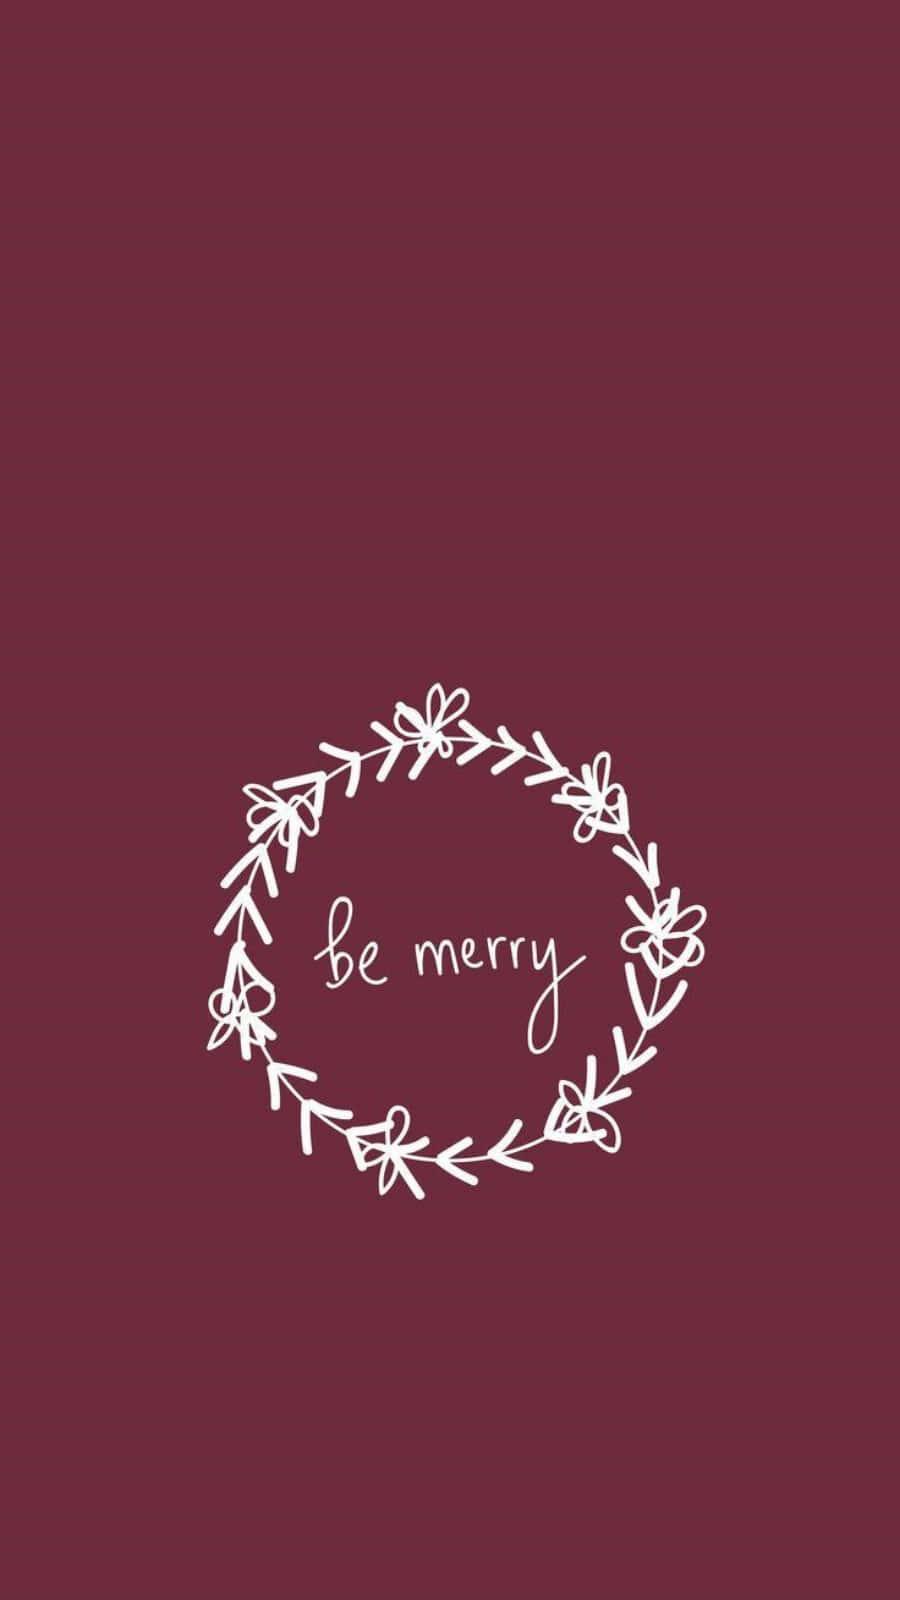 Download Be Merry Burgundy Taylor Swift Wallpaper